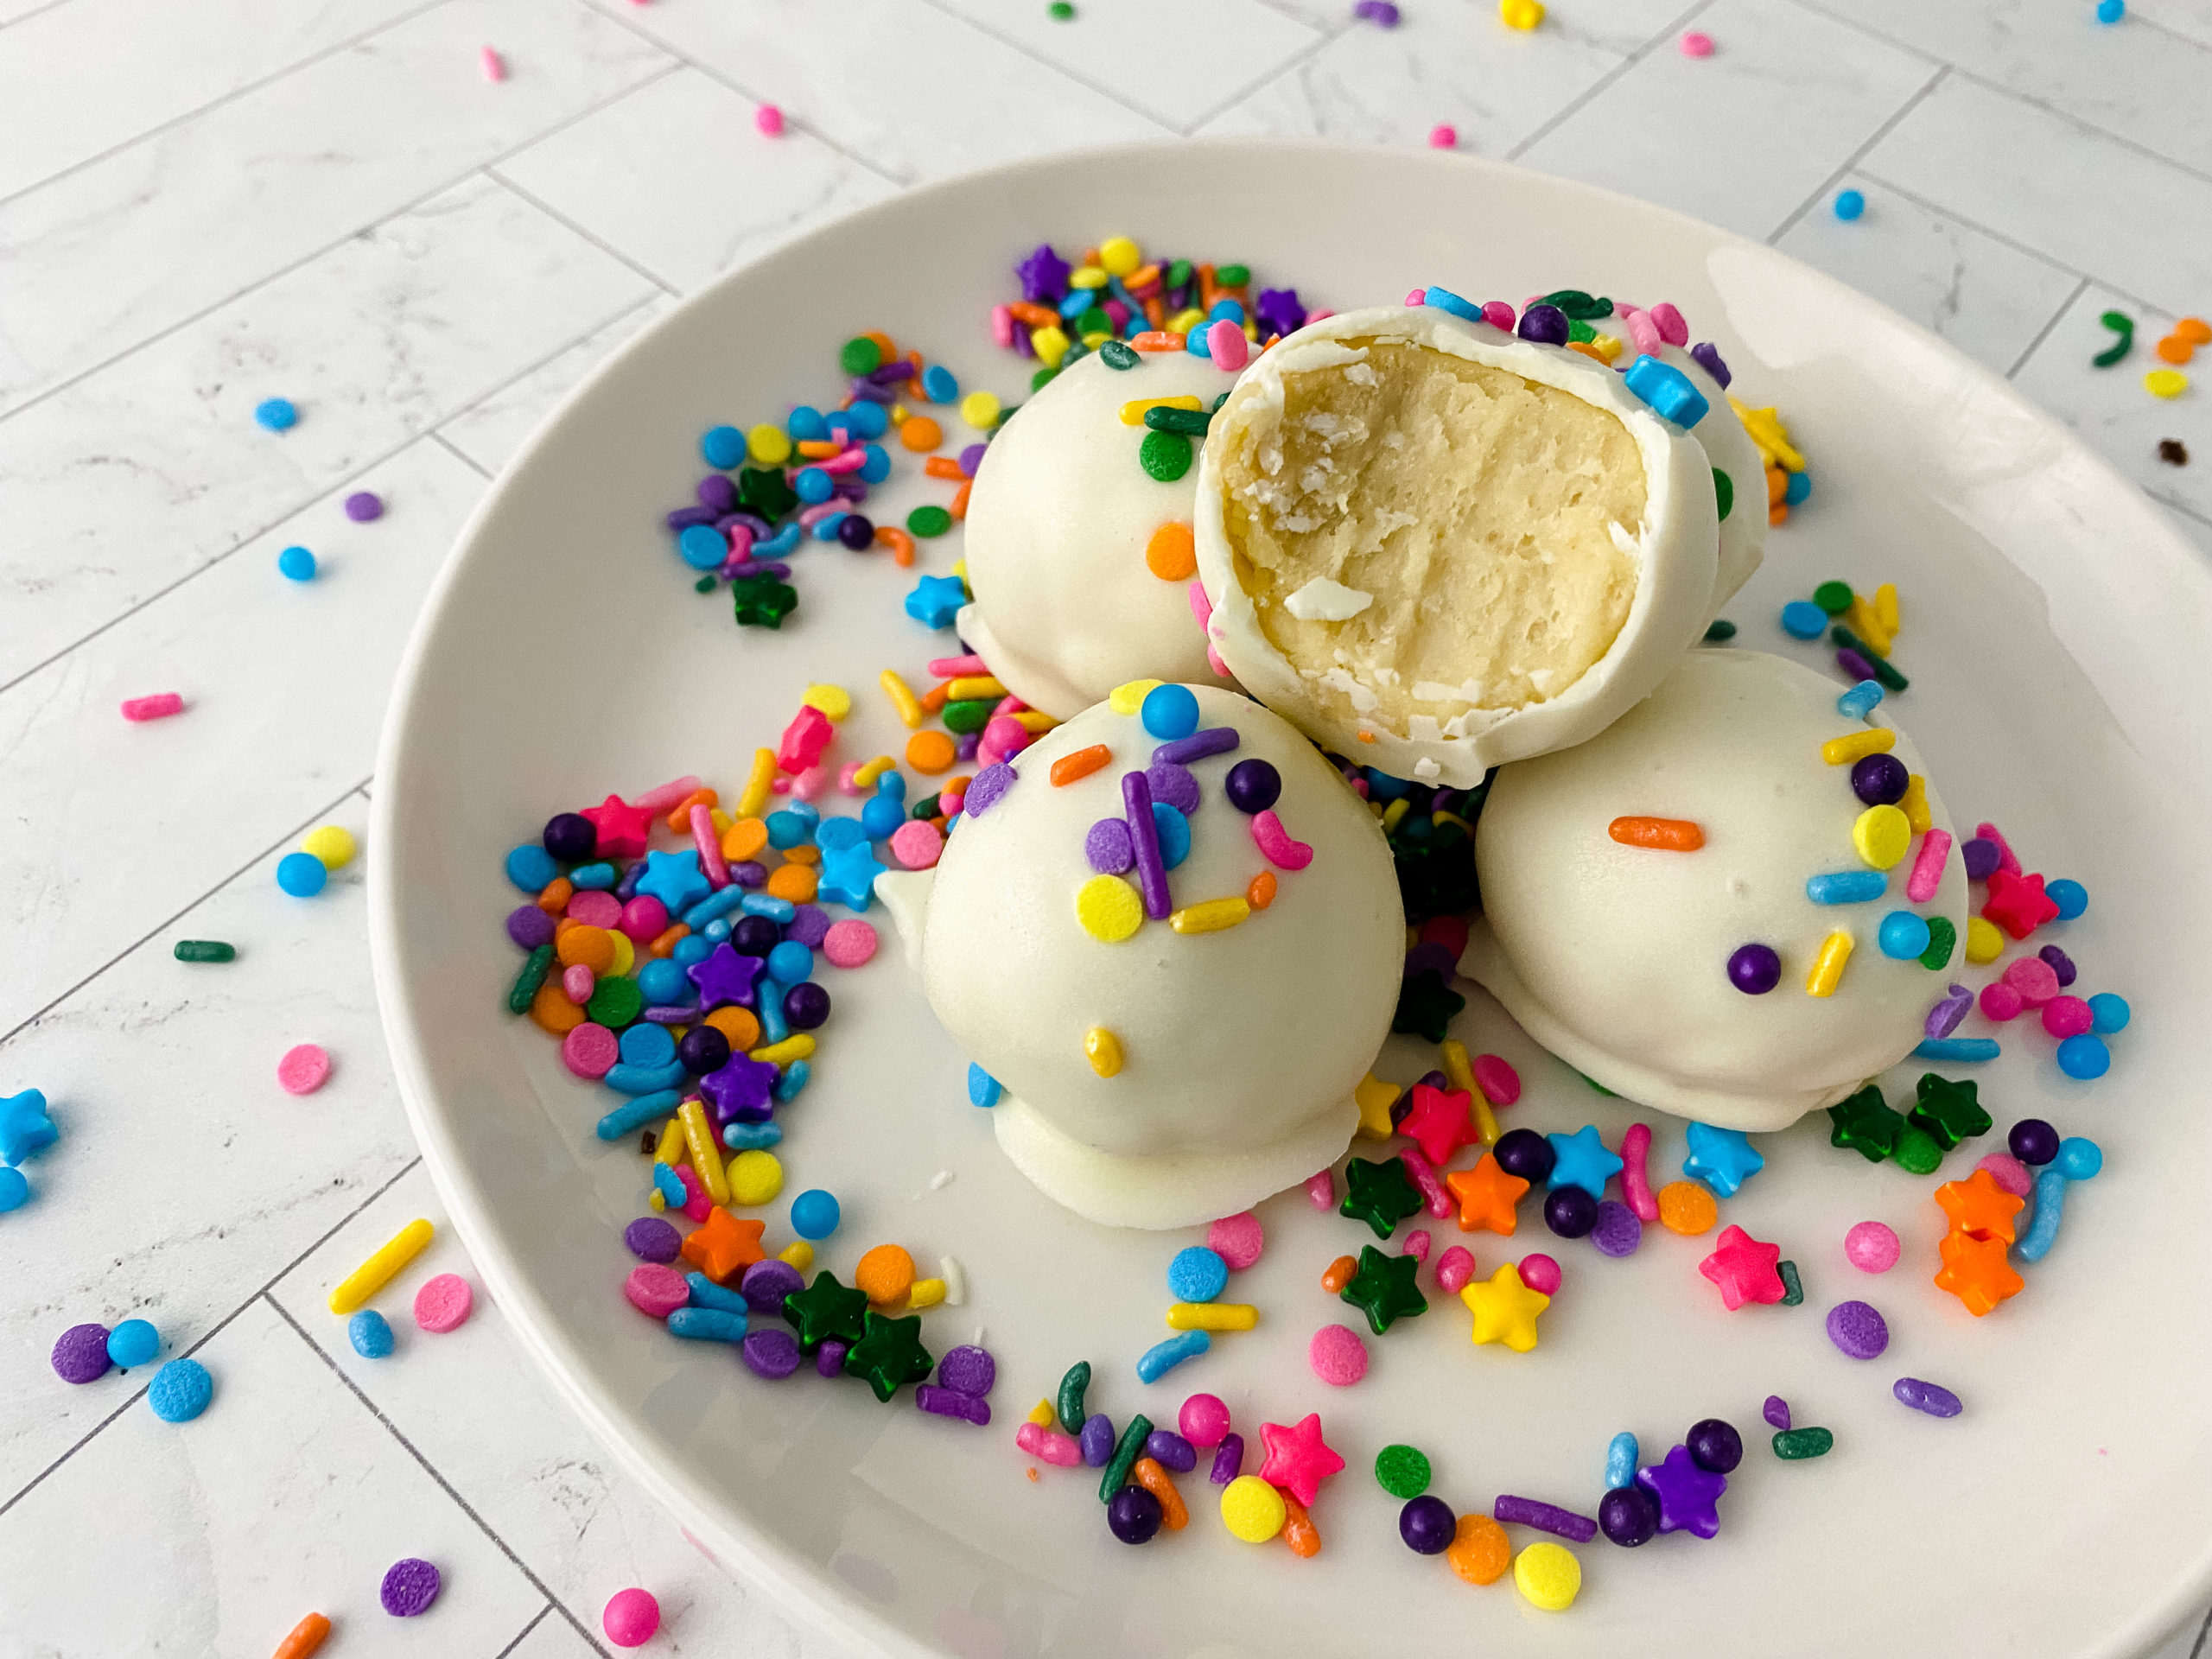 Need a delicious dessert that is gluten-free and kid-approved? These no bake sugar cookie truffles are perfection.